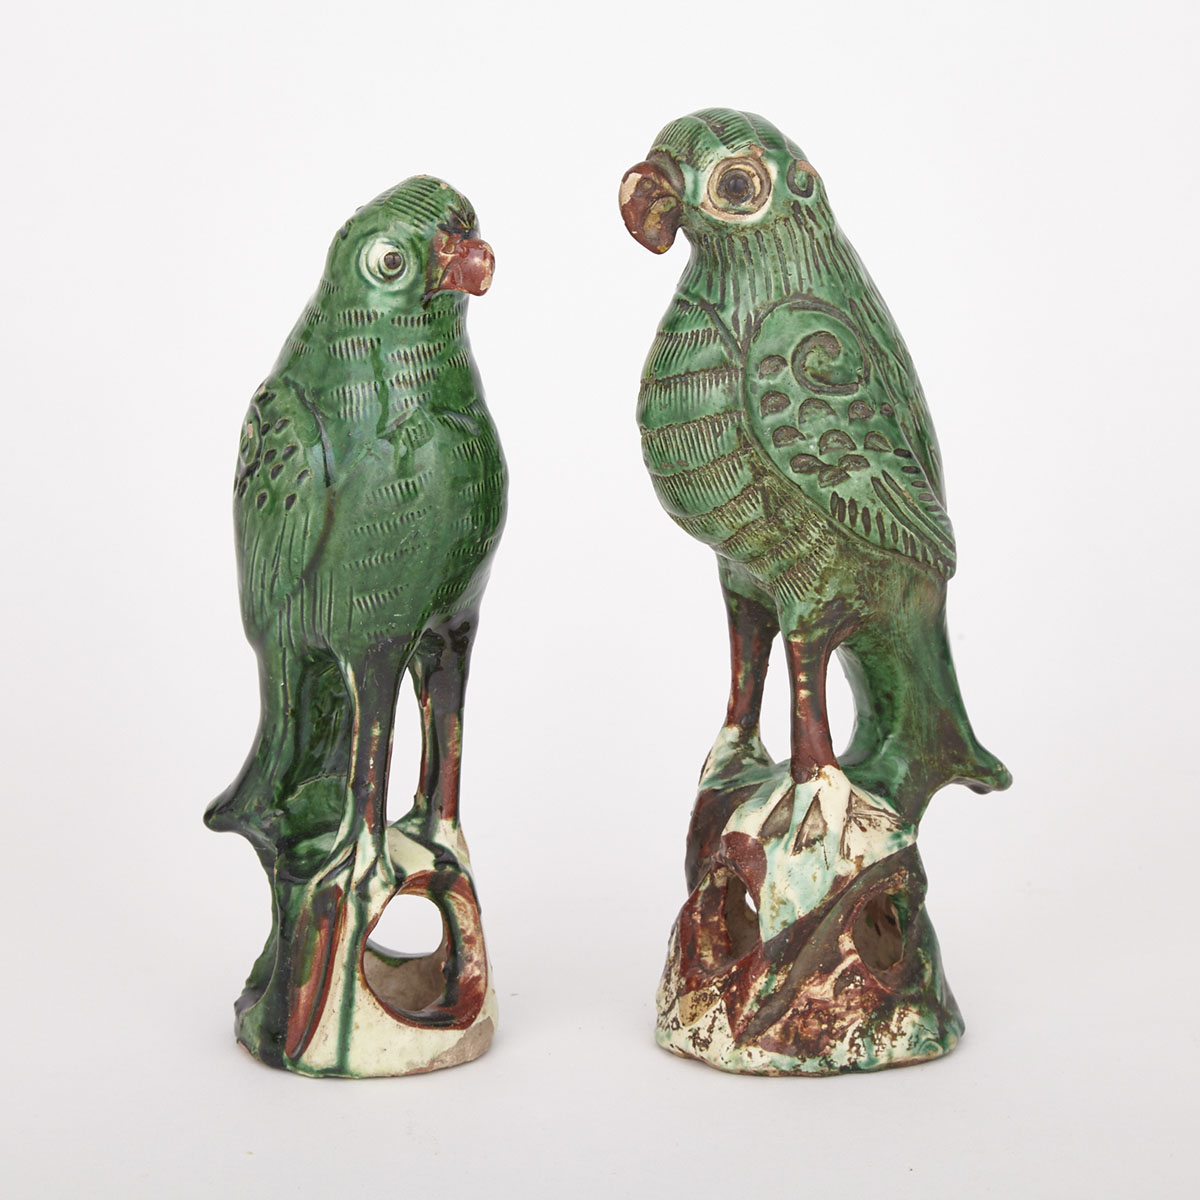 Matched Pair of Green Glazed Persian Pottery Parrots, 19th Century 